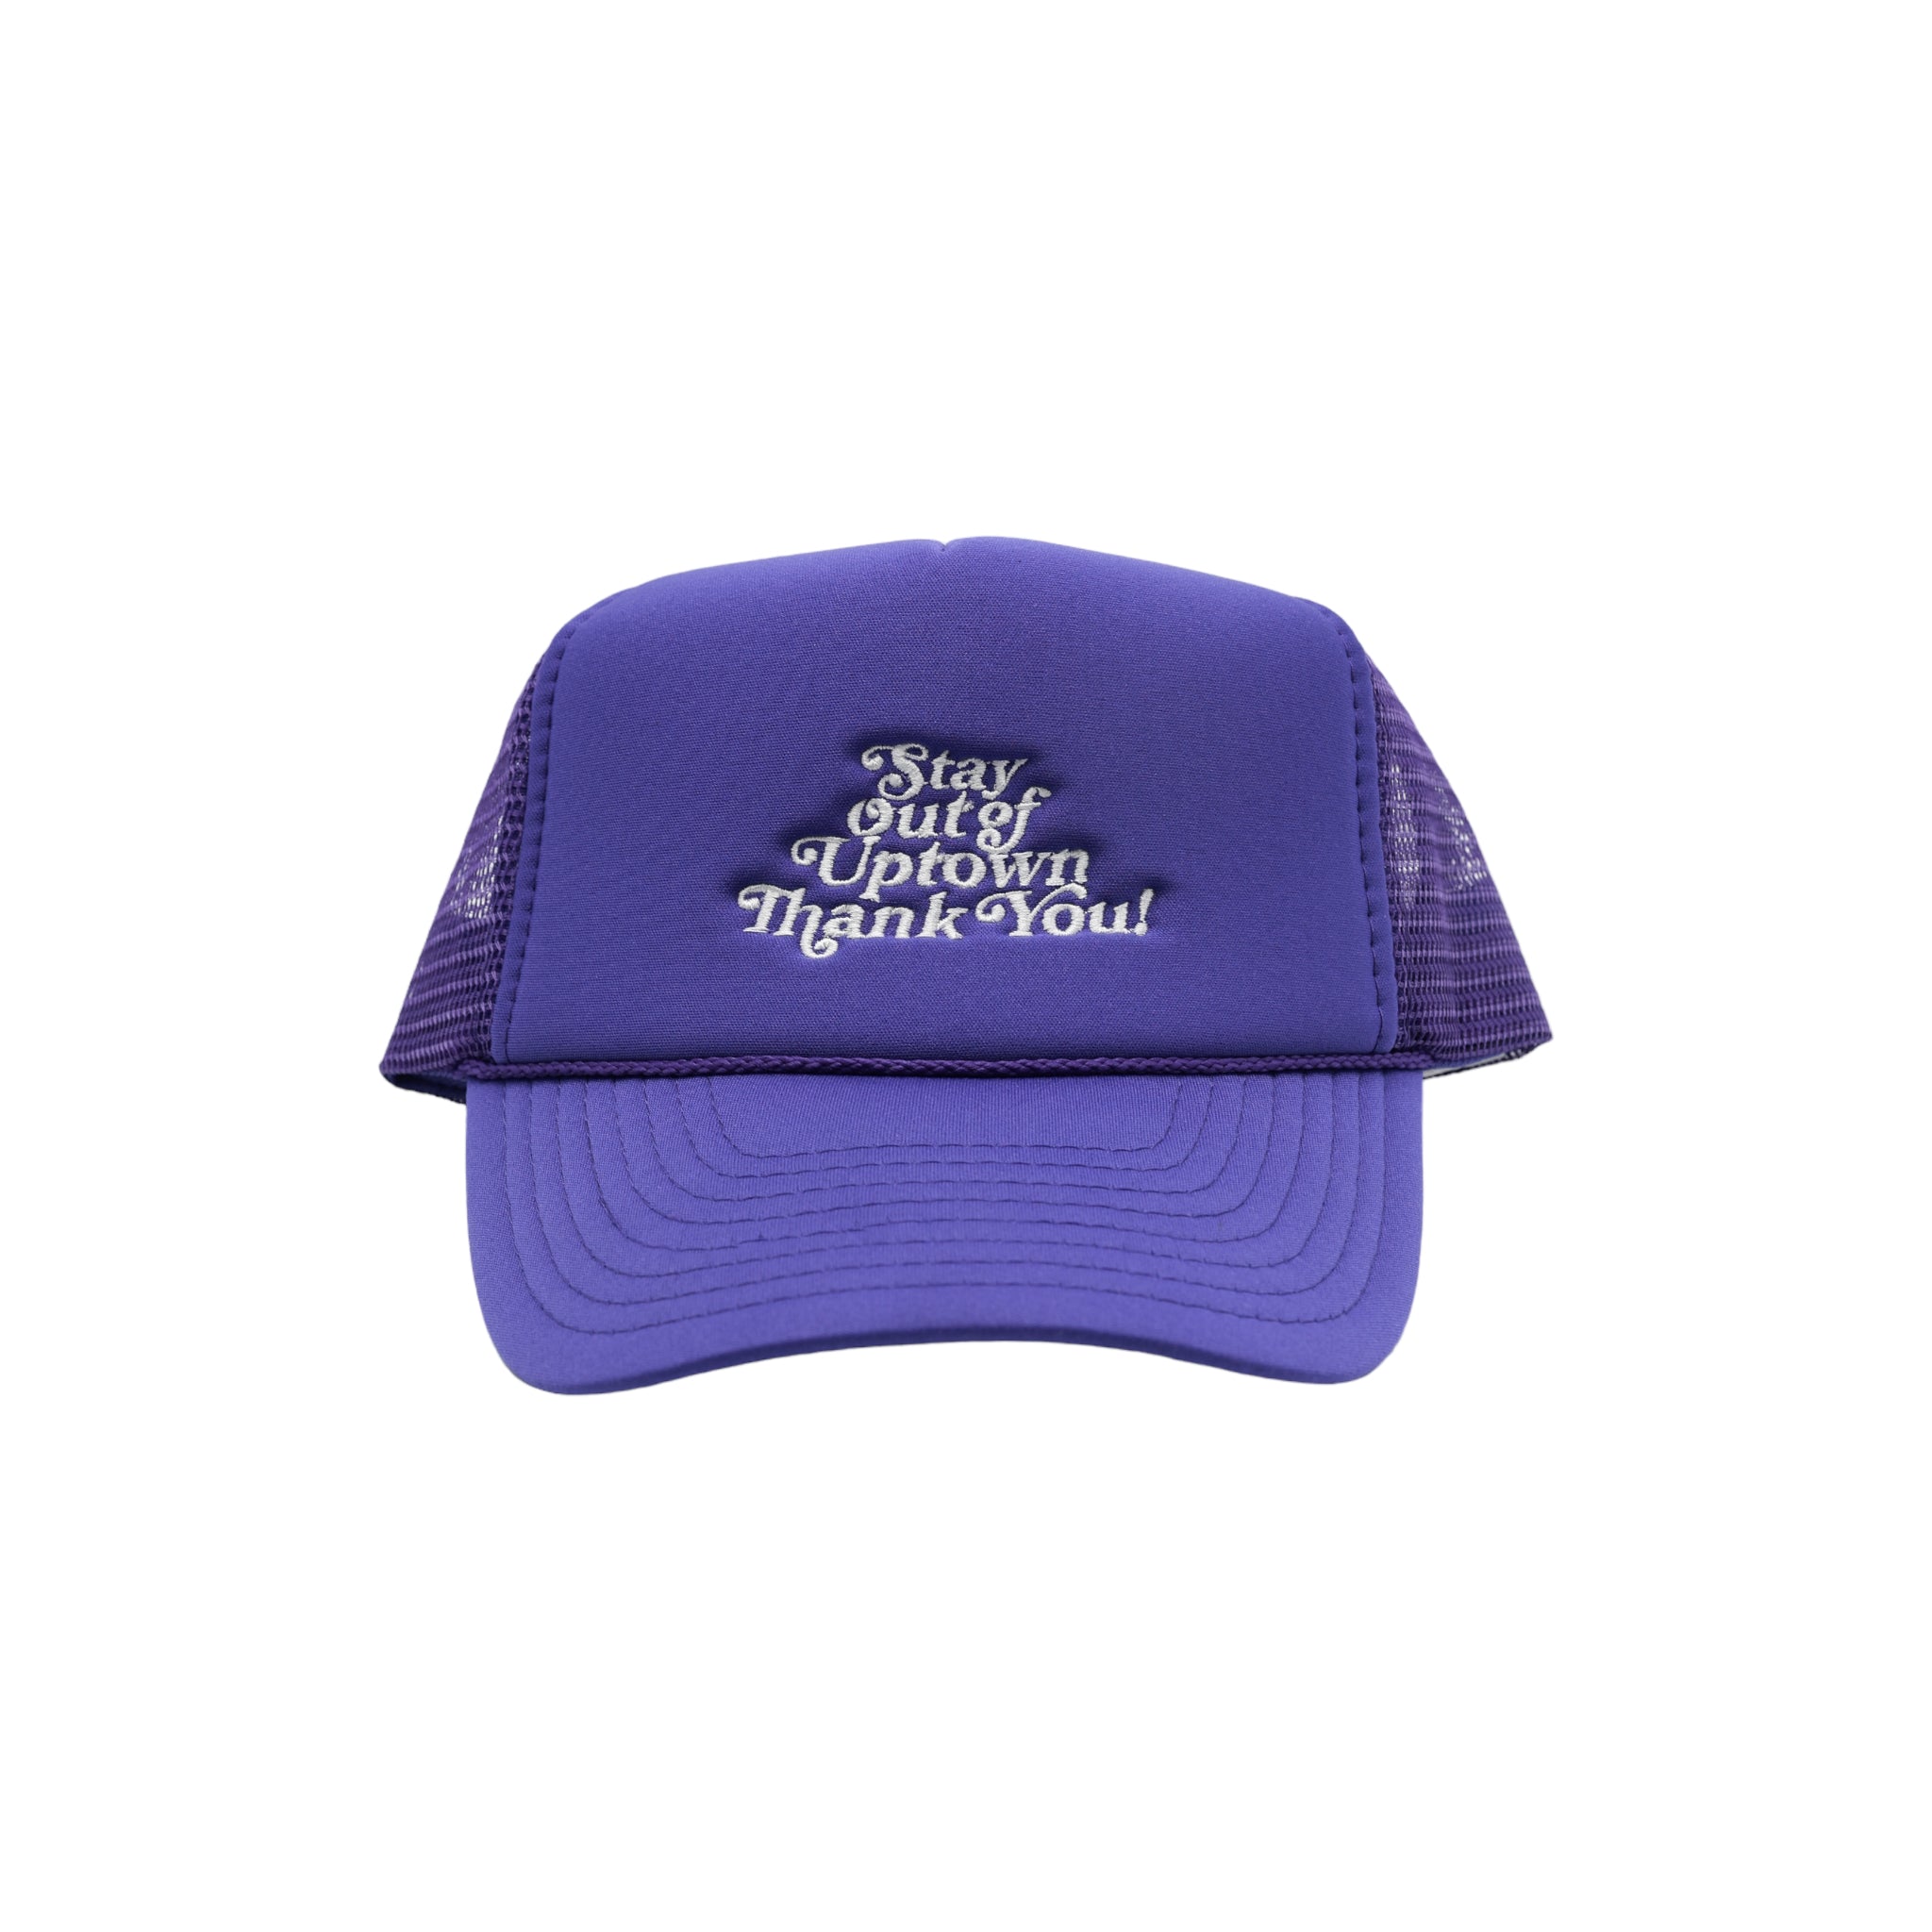 Stay Out Of Uptown - Trucker Cap Purple (1 of 1)